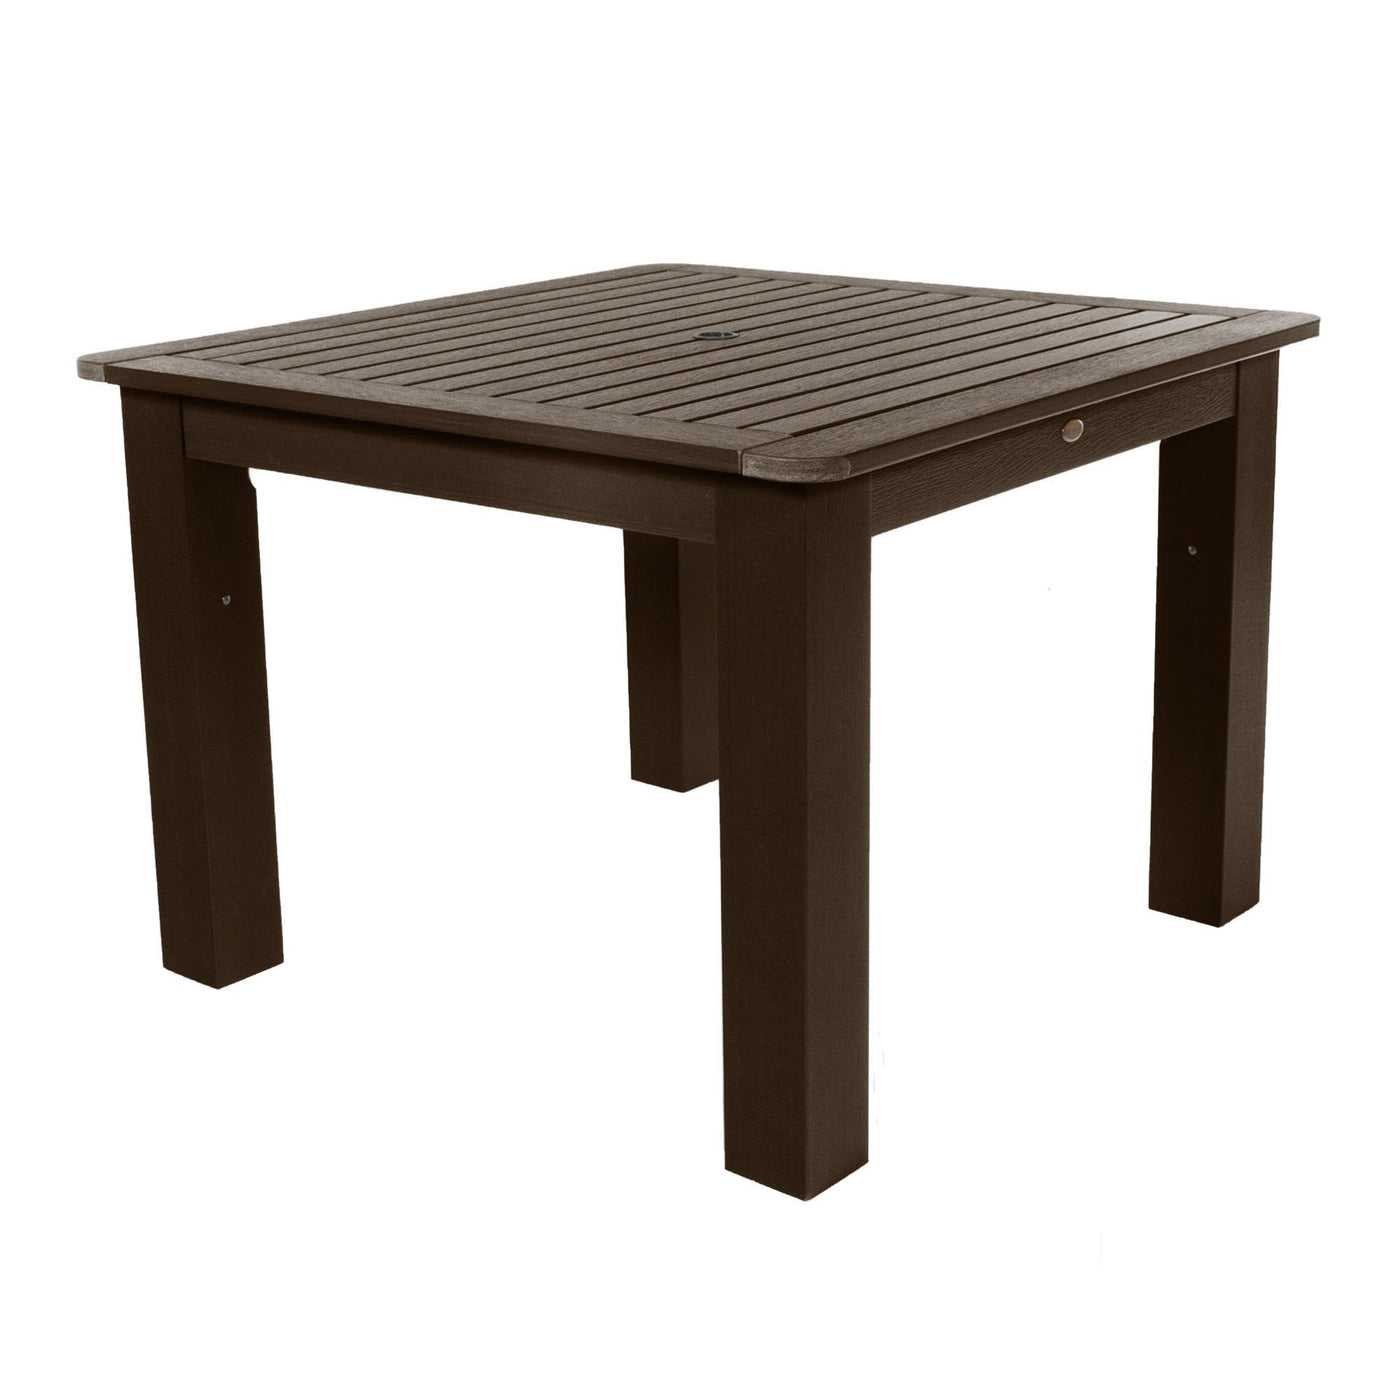 Square 42in x 42in Dining Table - Dining Height Dining Highwood USA Weathered Acorn 